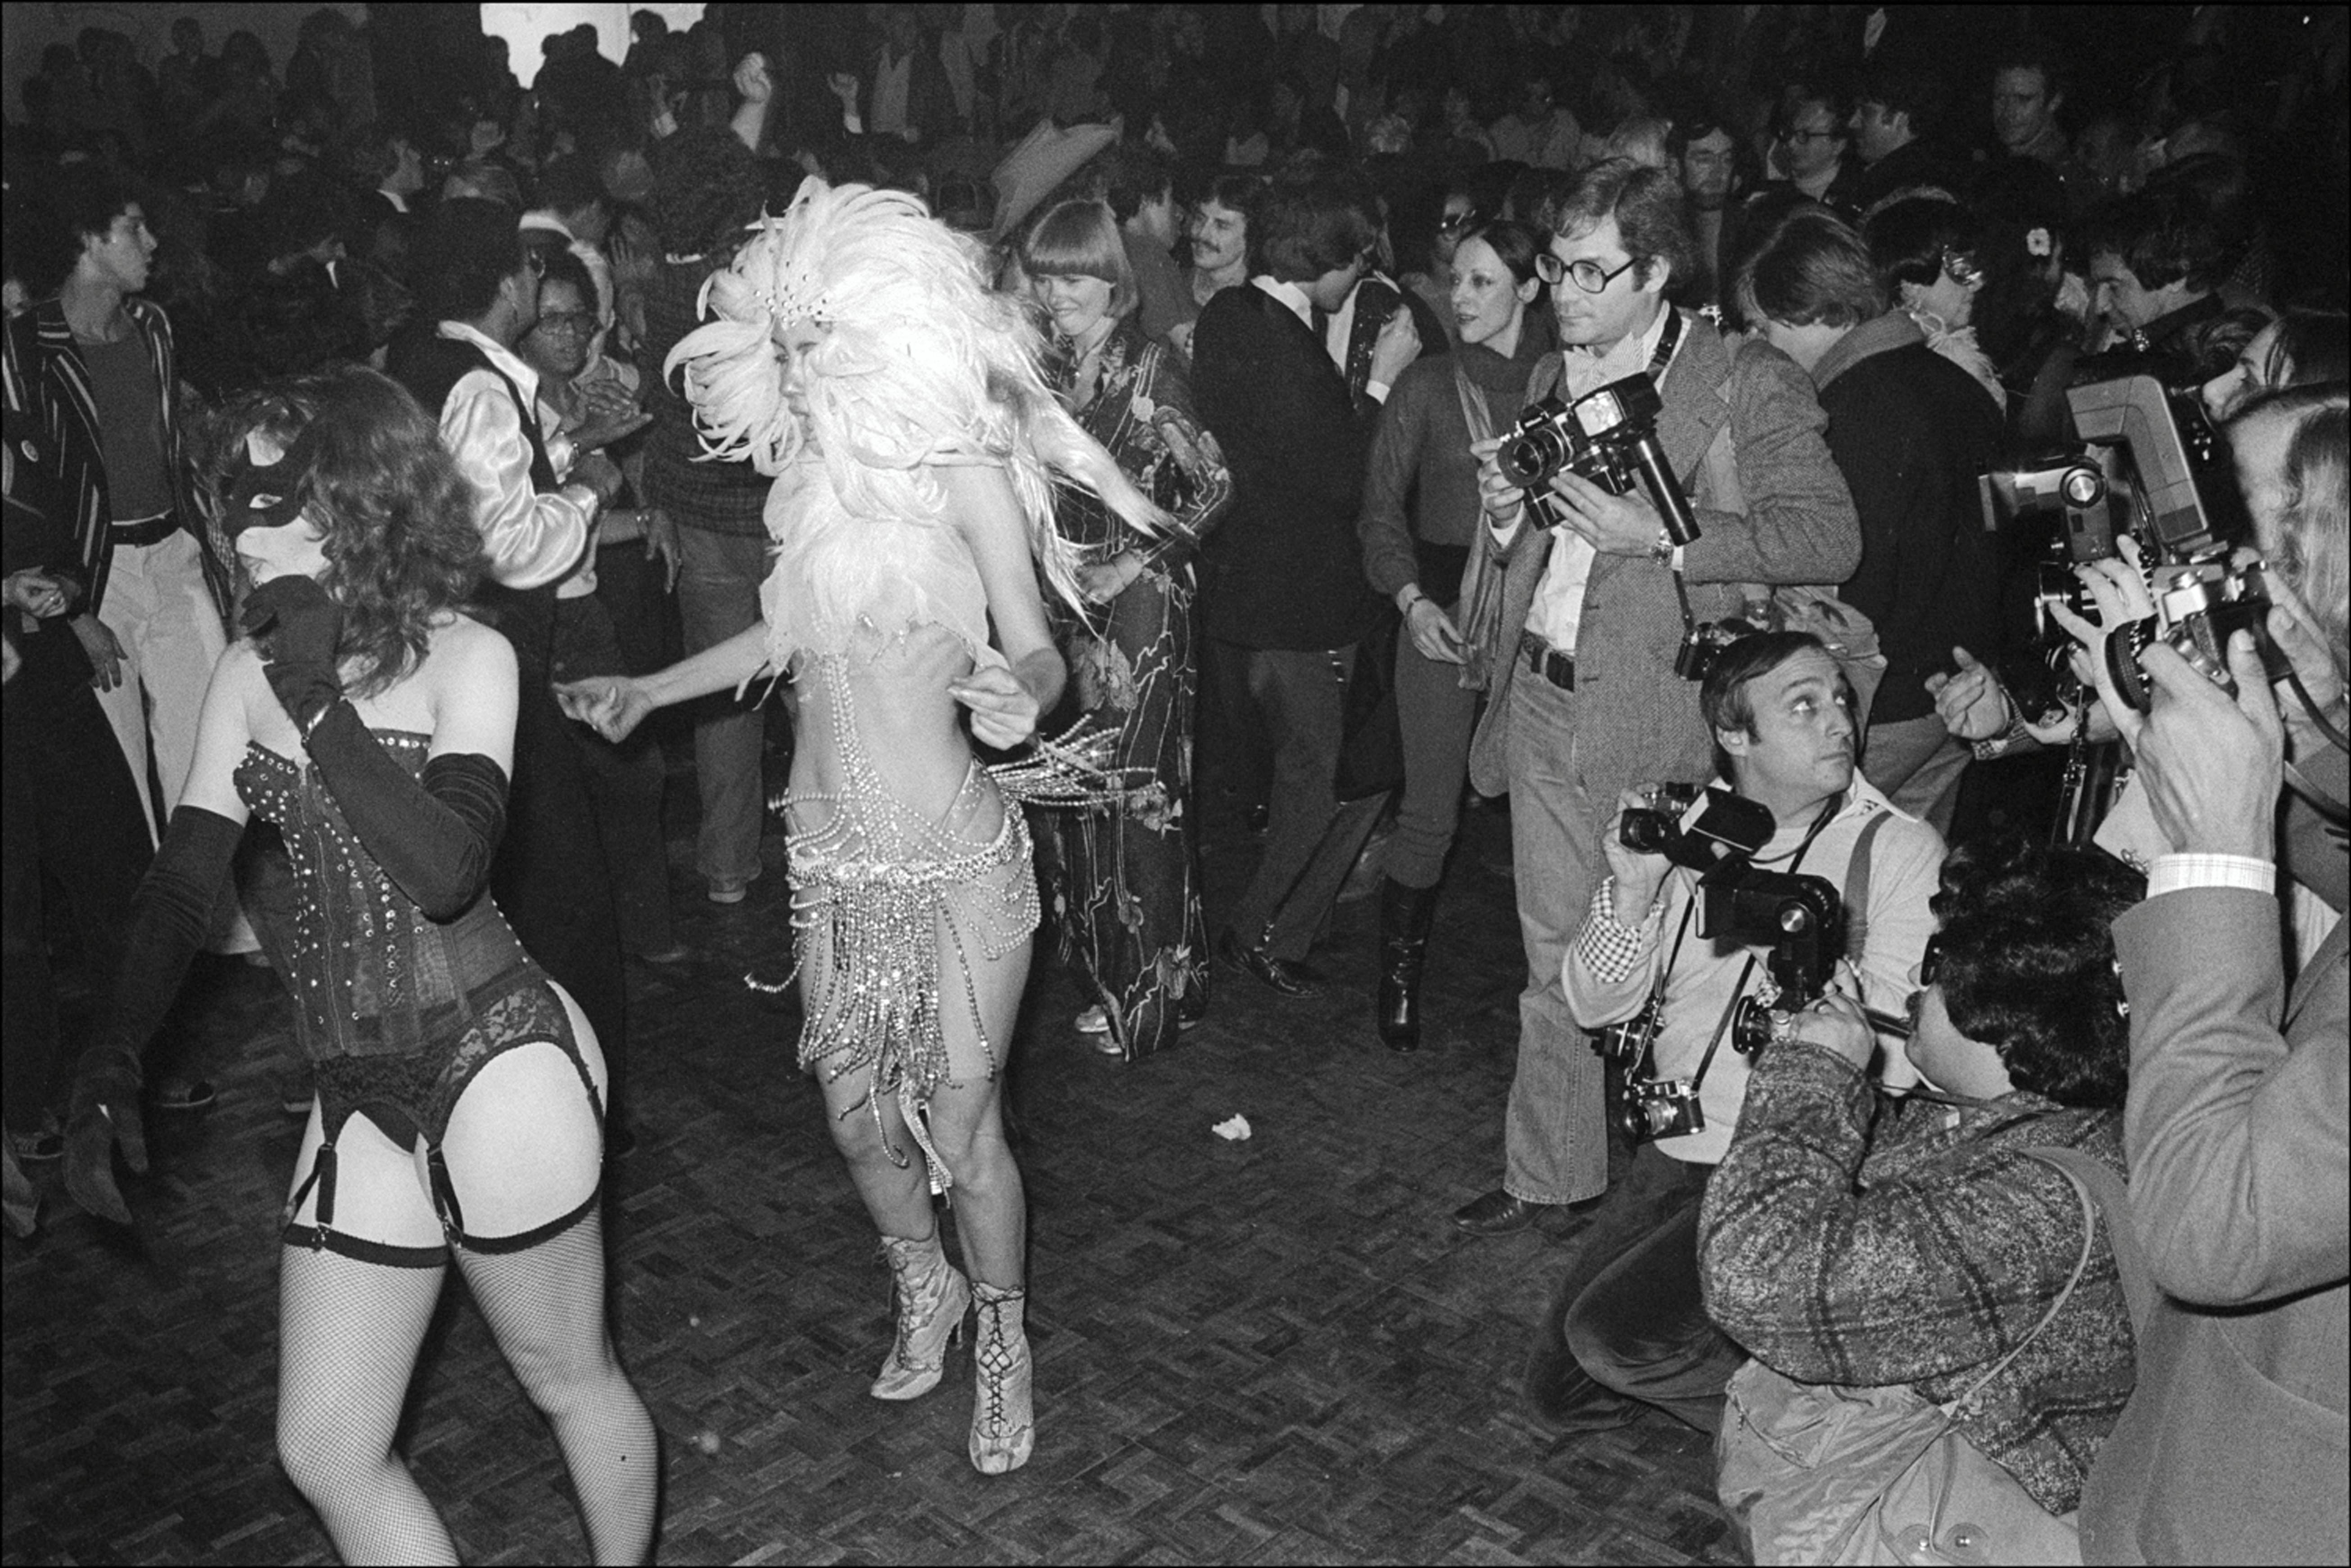 At the Hookers Ball, strippers, dancers, and activists took over San Francisco and partied for sex workers rights by Nina Renata Aron Timeline